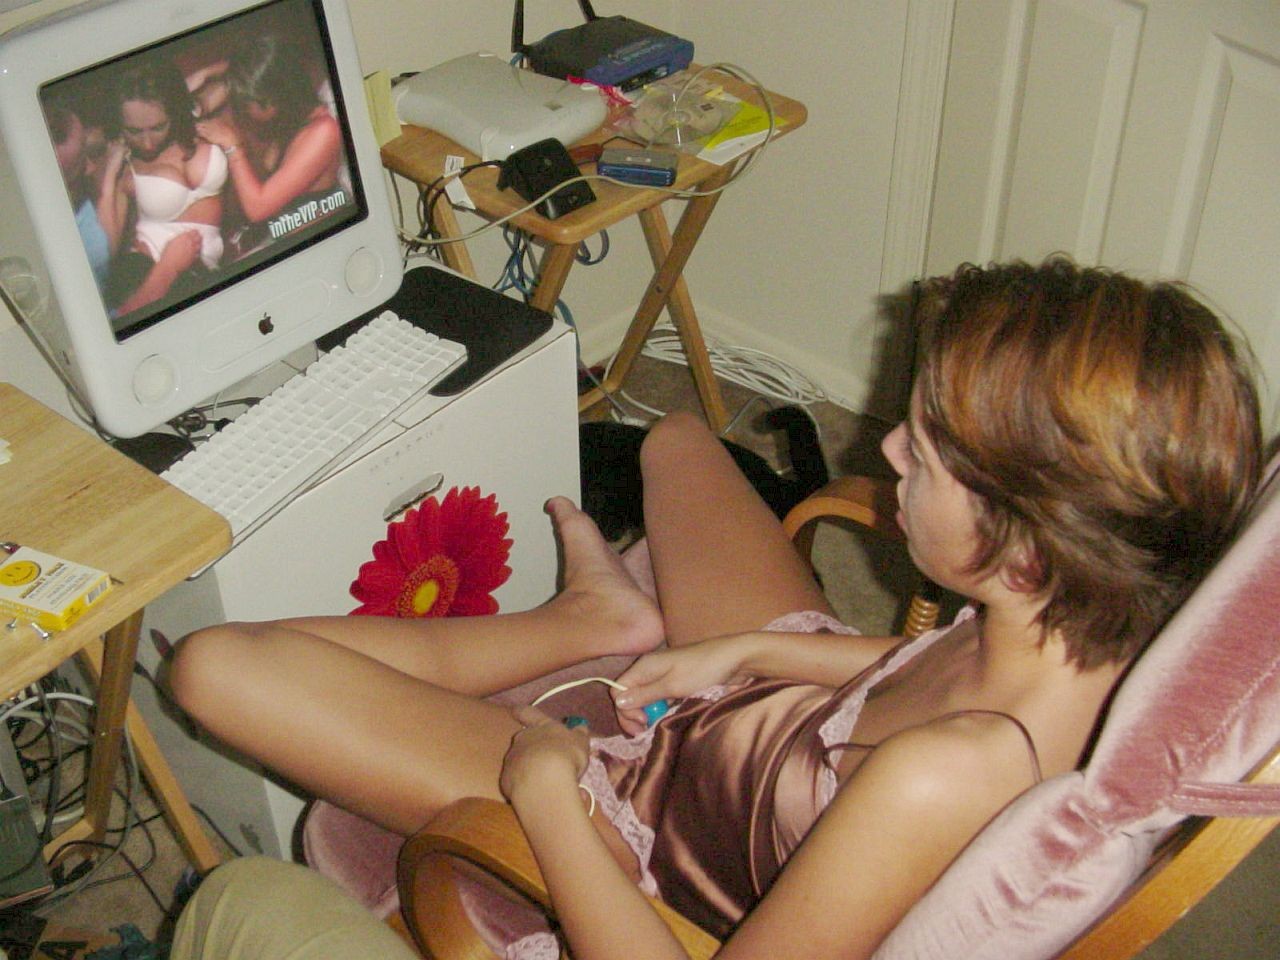 Horny watching porn